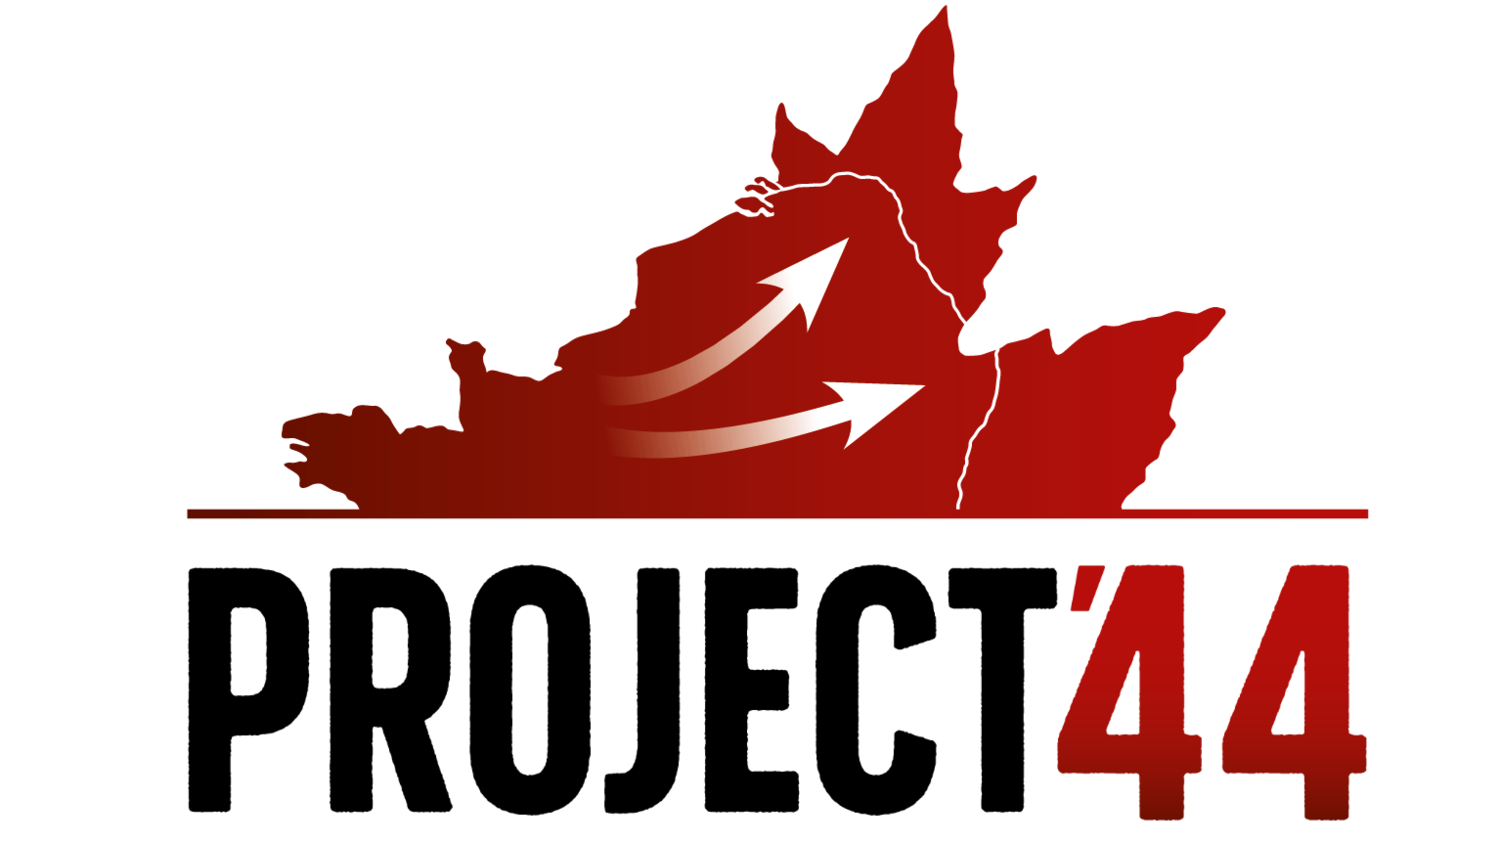 Project44